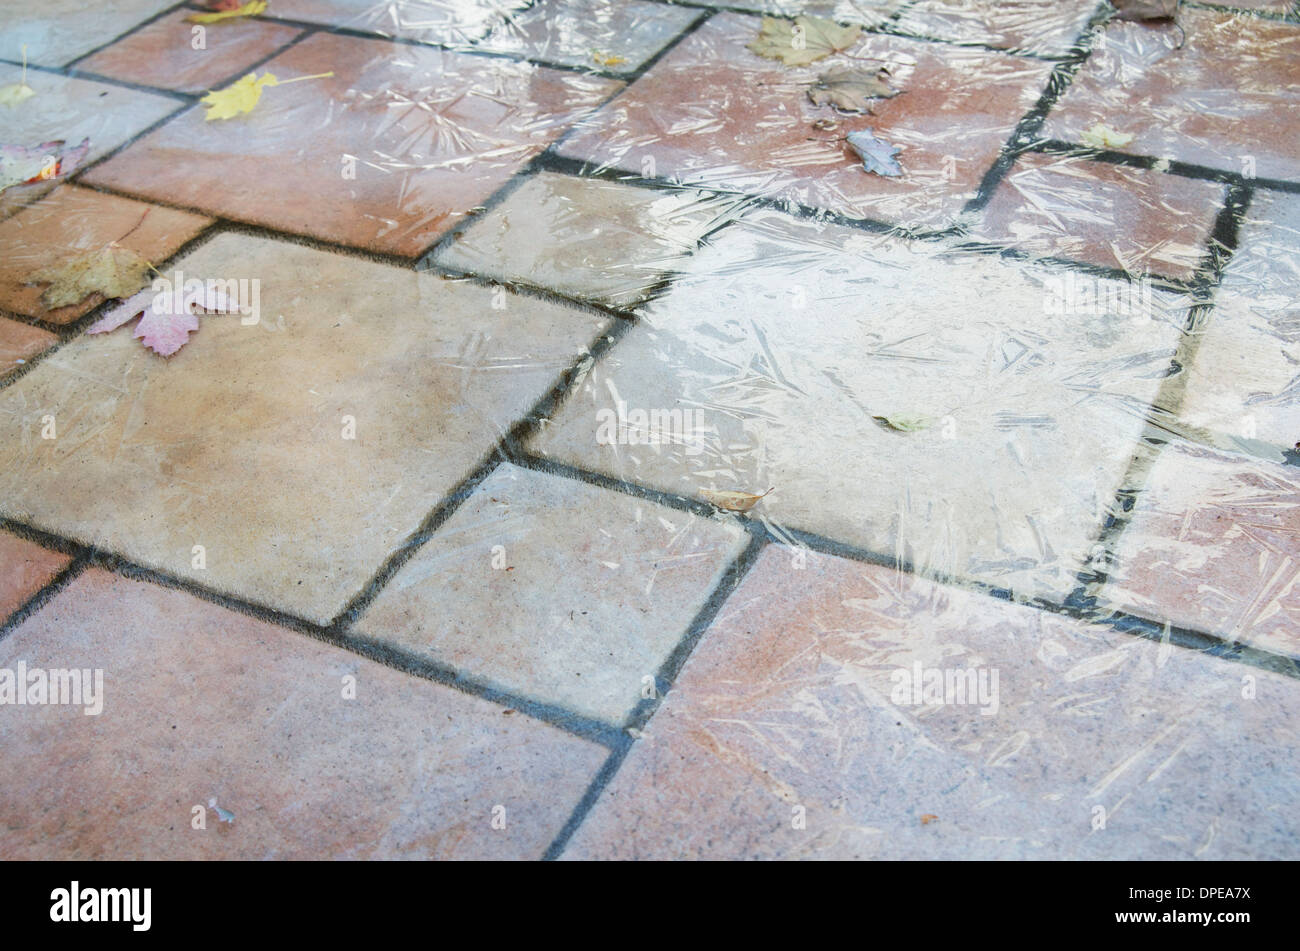 Glare ice on ceramic tile outdoors that is very dangerous Stock Photo